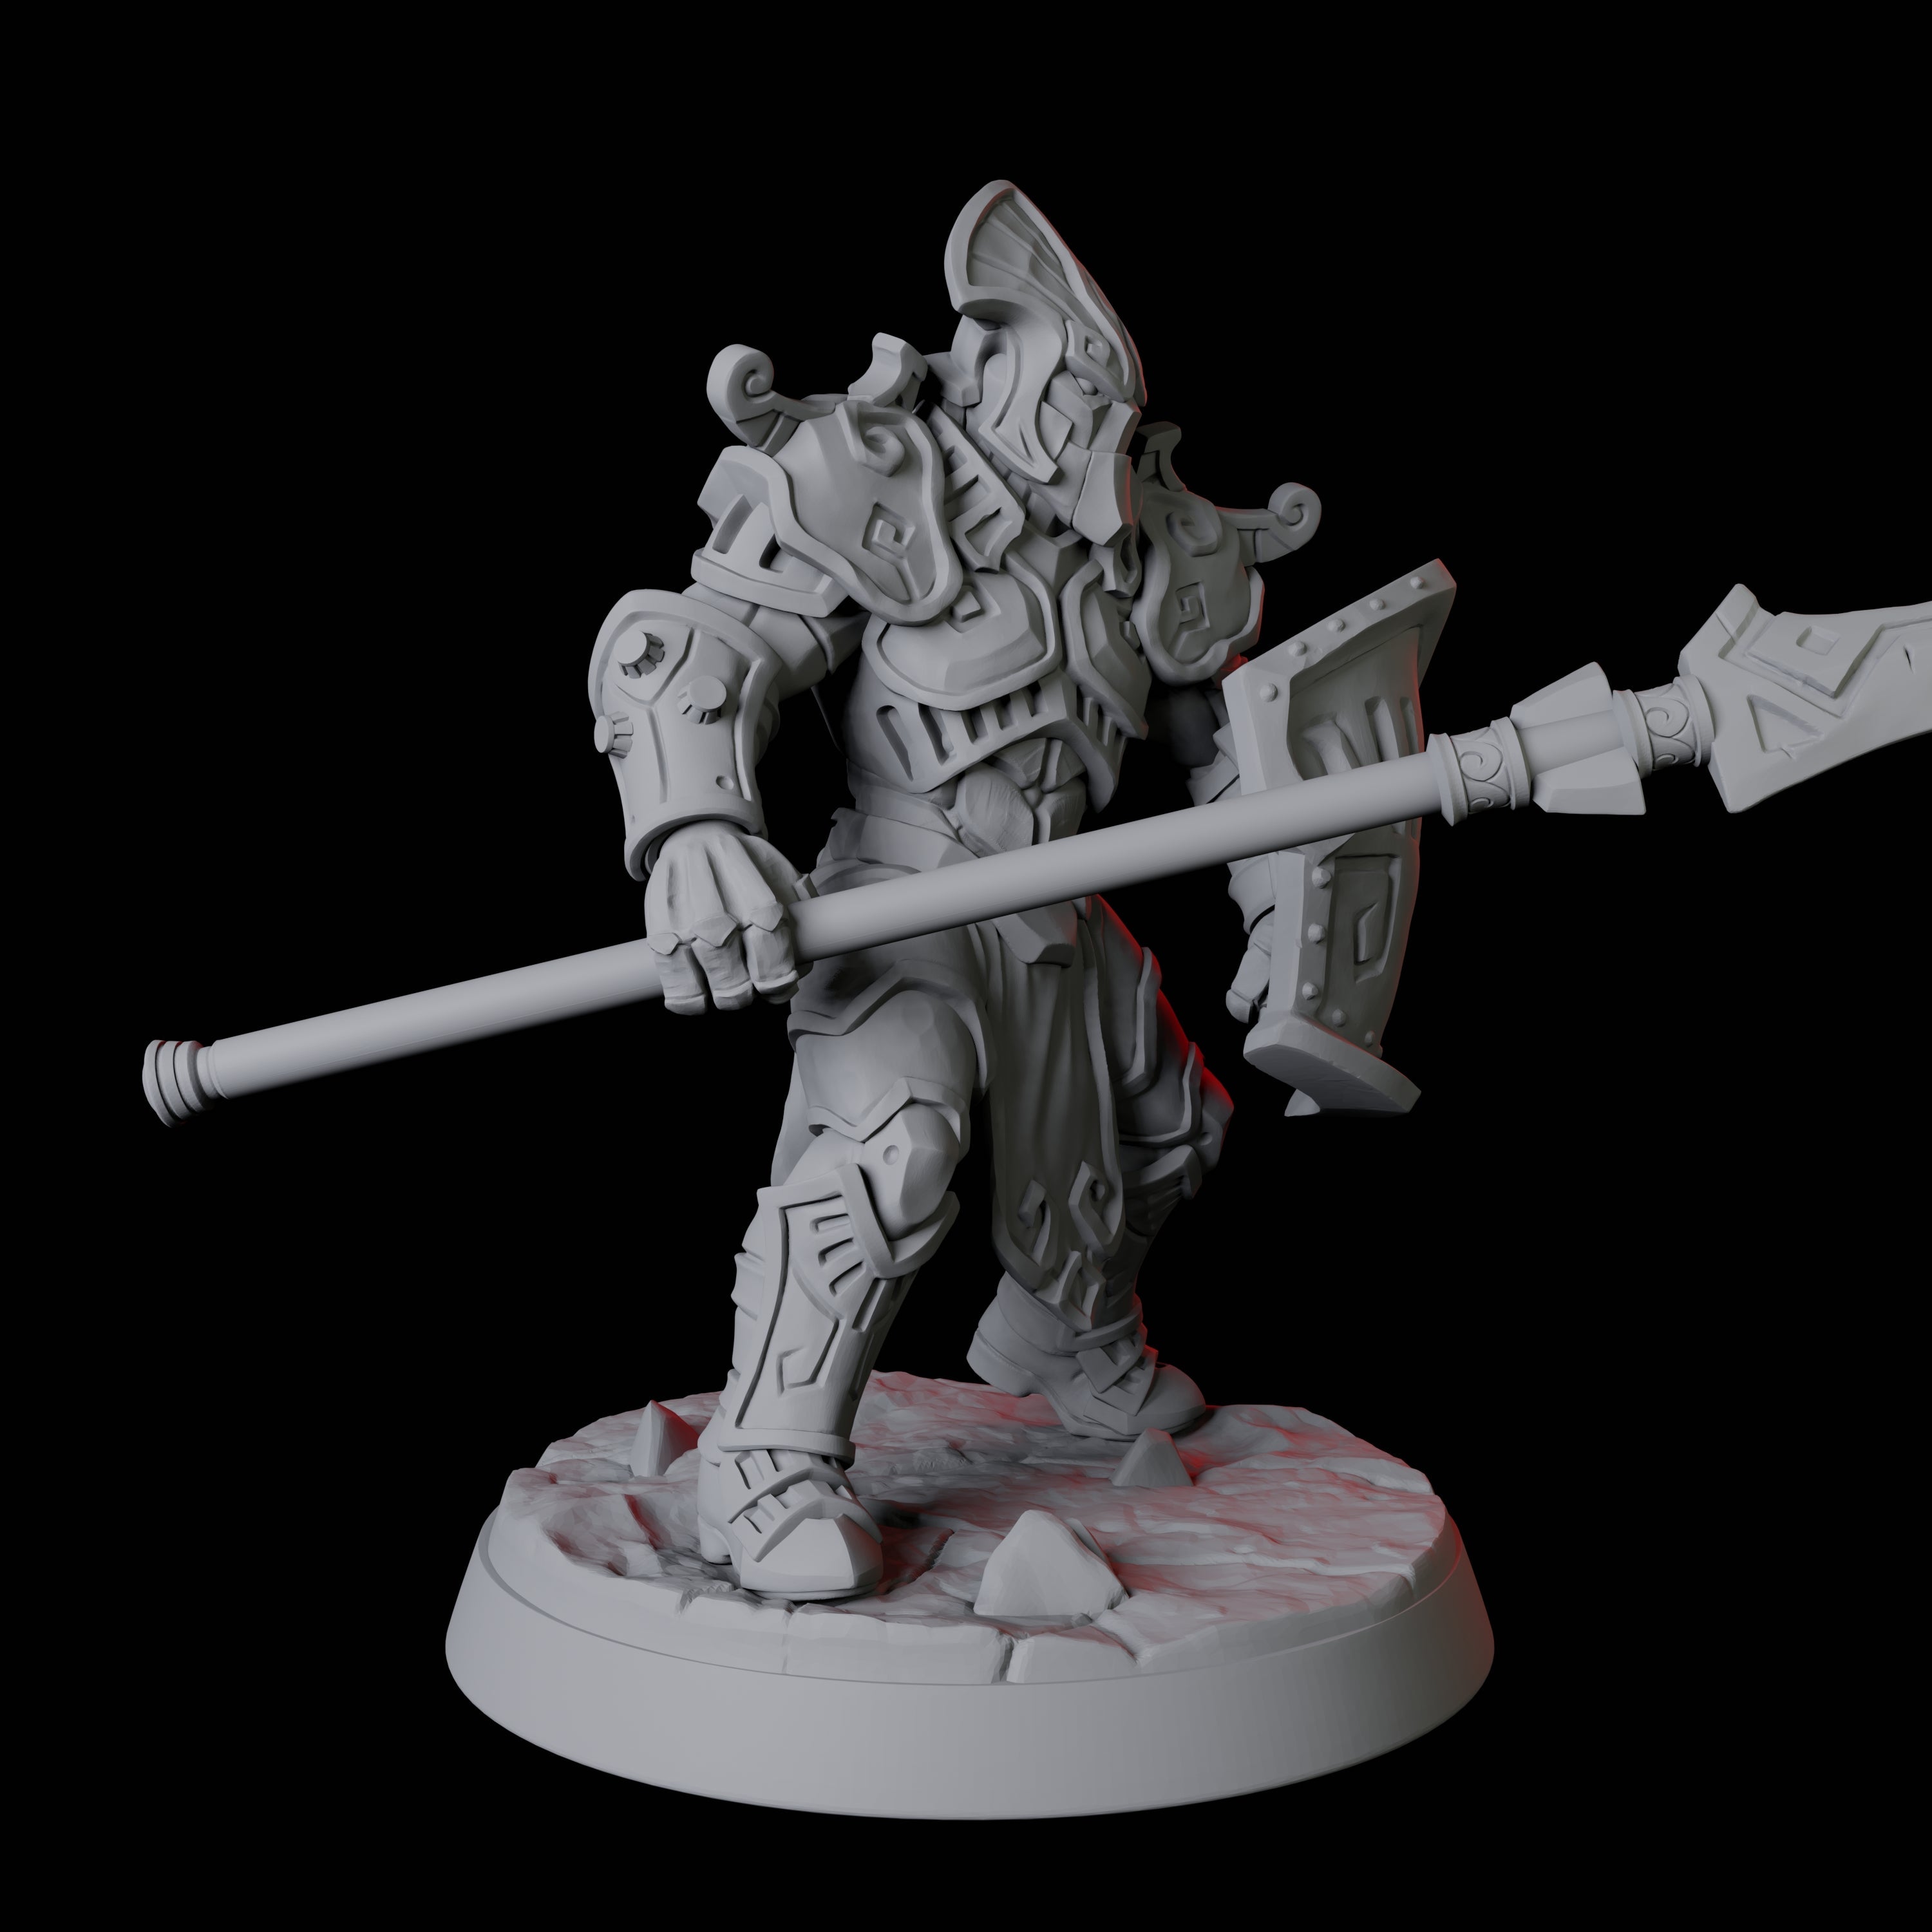 Battle-Ready Warforged B Miniature for Dungeons and Dragons, Pathfinder or other TTRPGs